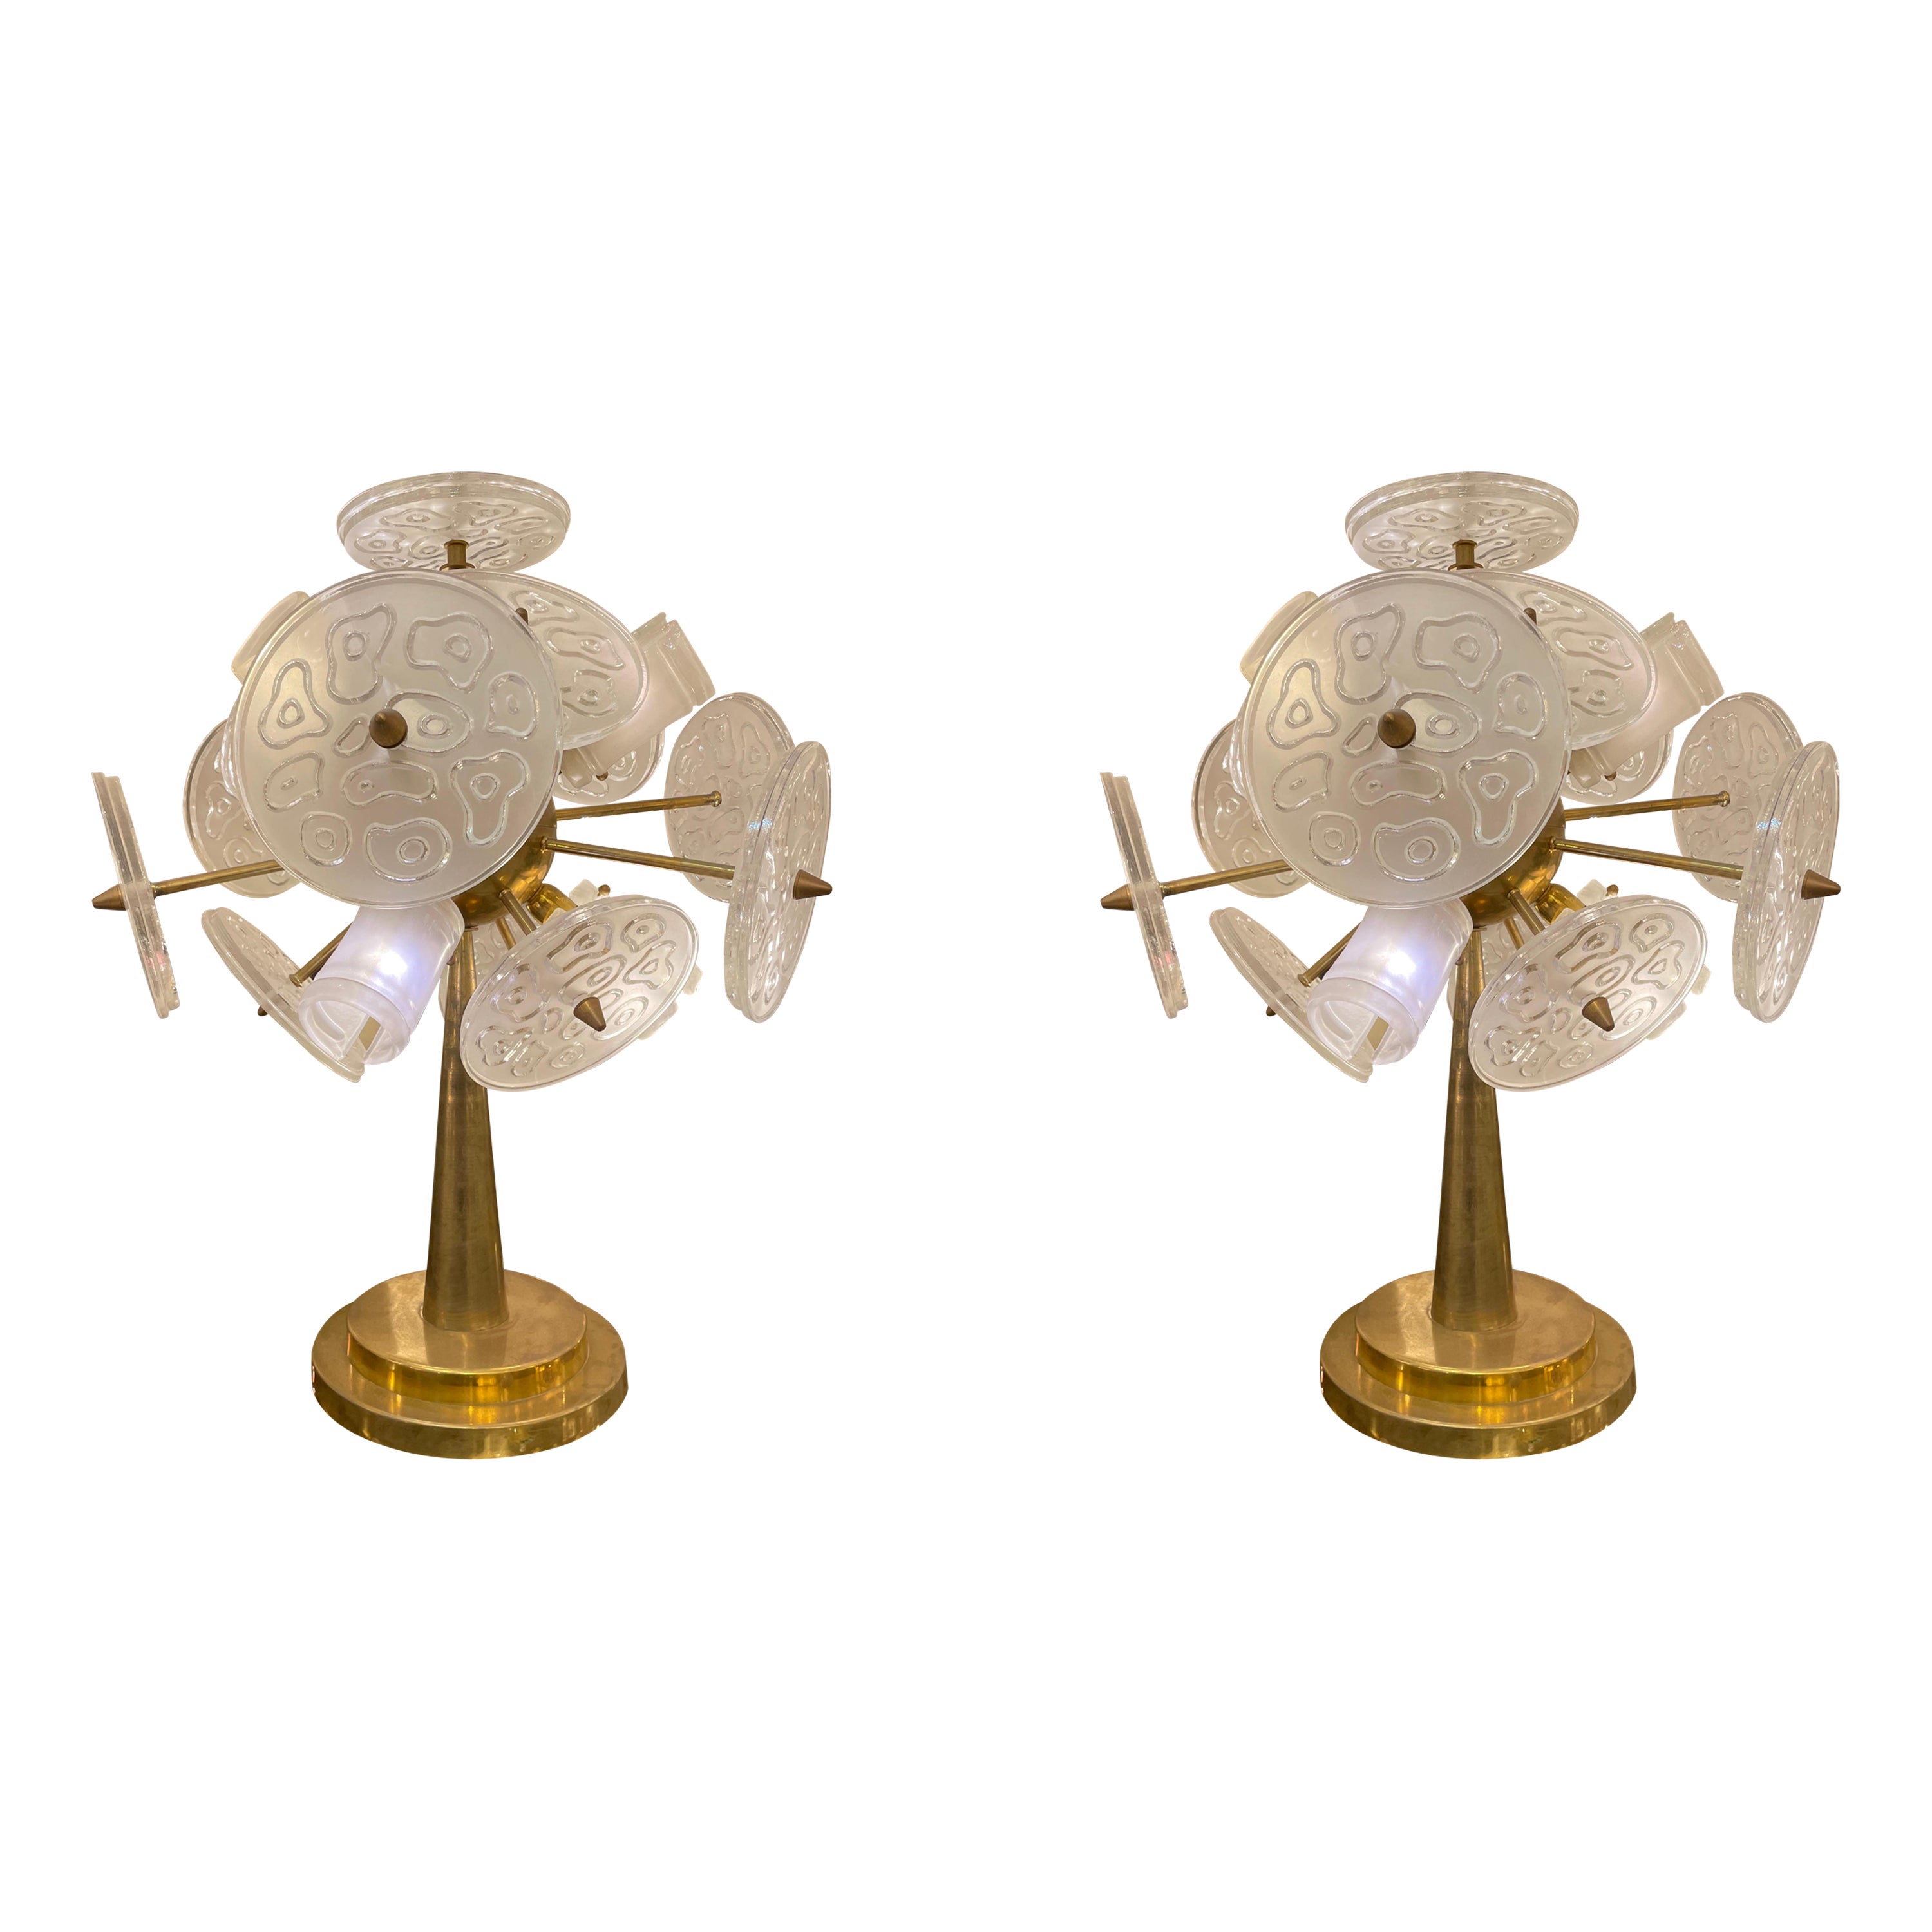 Outstanding Pair of Italian Table Lamps in Murano Glass, Italy 1960s